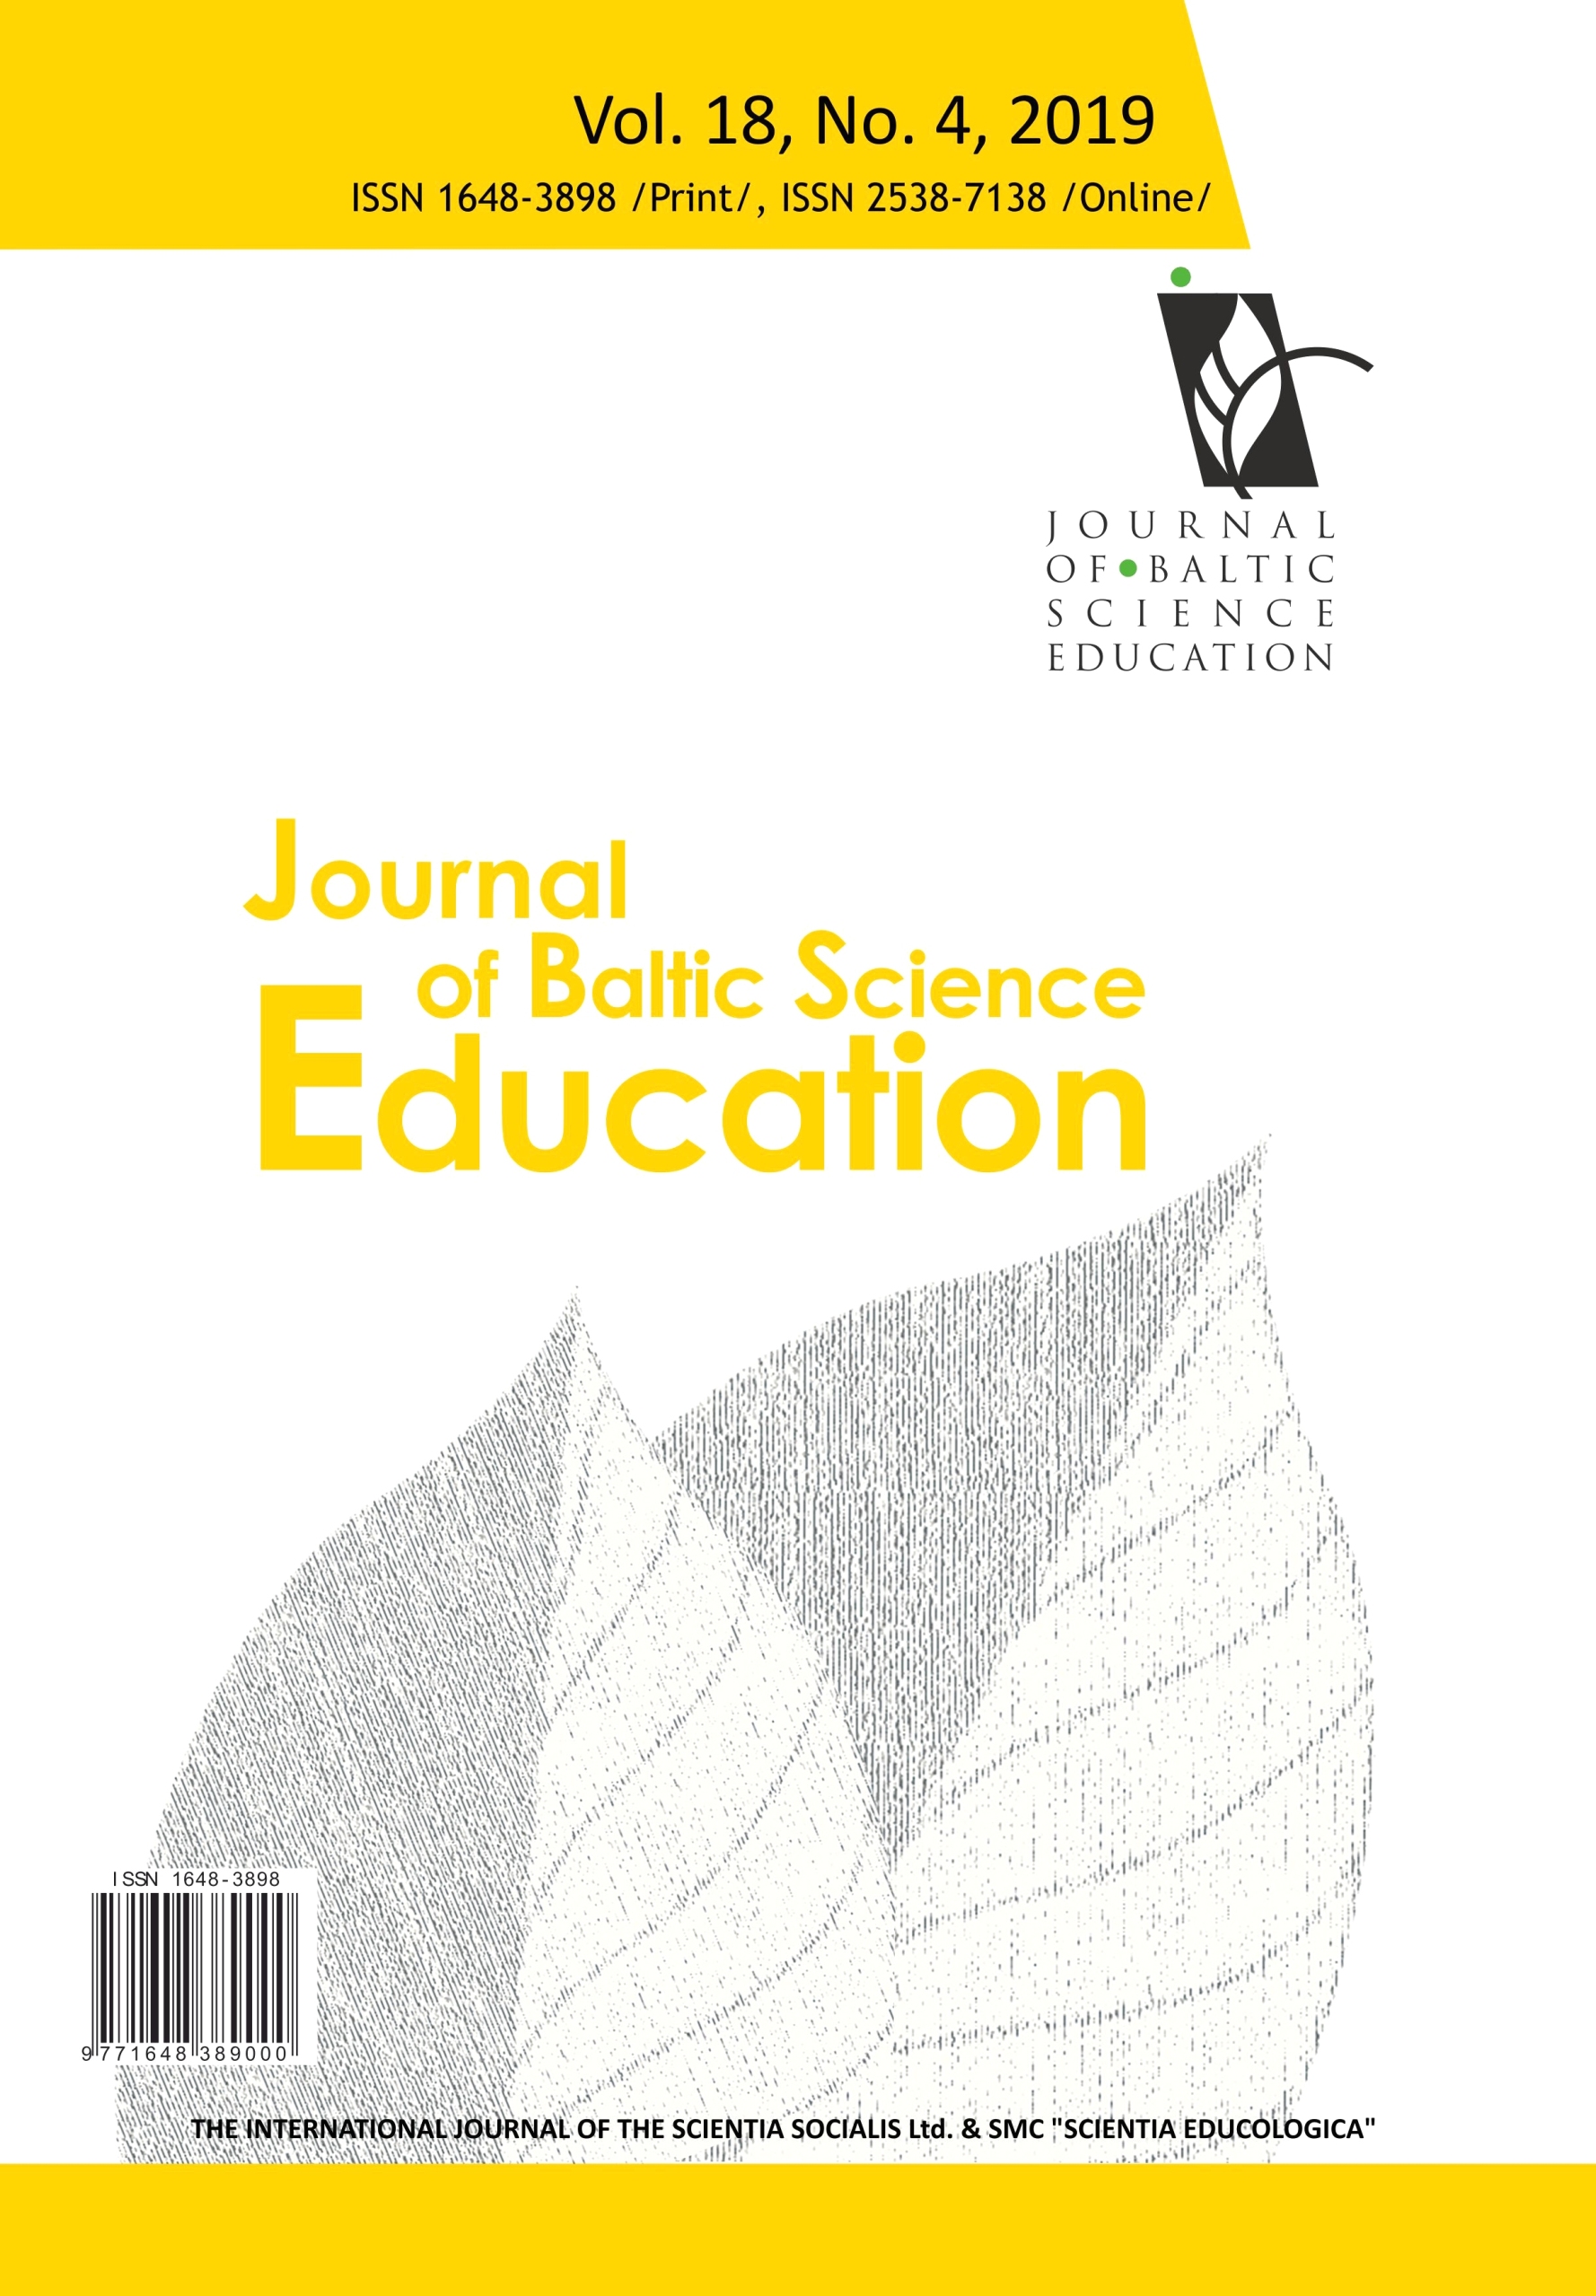 EXAMINING SECONDARY SCHOOL STUDENTS’ MISCONCEPTIONS ABOUT THE HUMAN BODY: CORRELATIONS BETWEEN THE METHODS OF DRAWING AND OPEN-ENDED QUESTIONS Cover Image